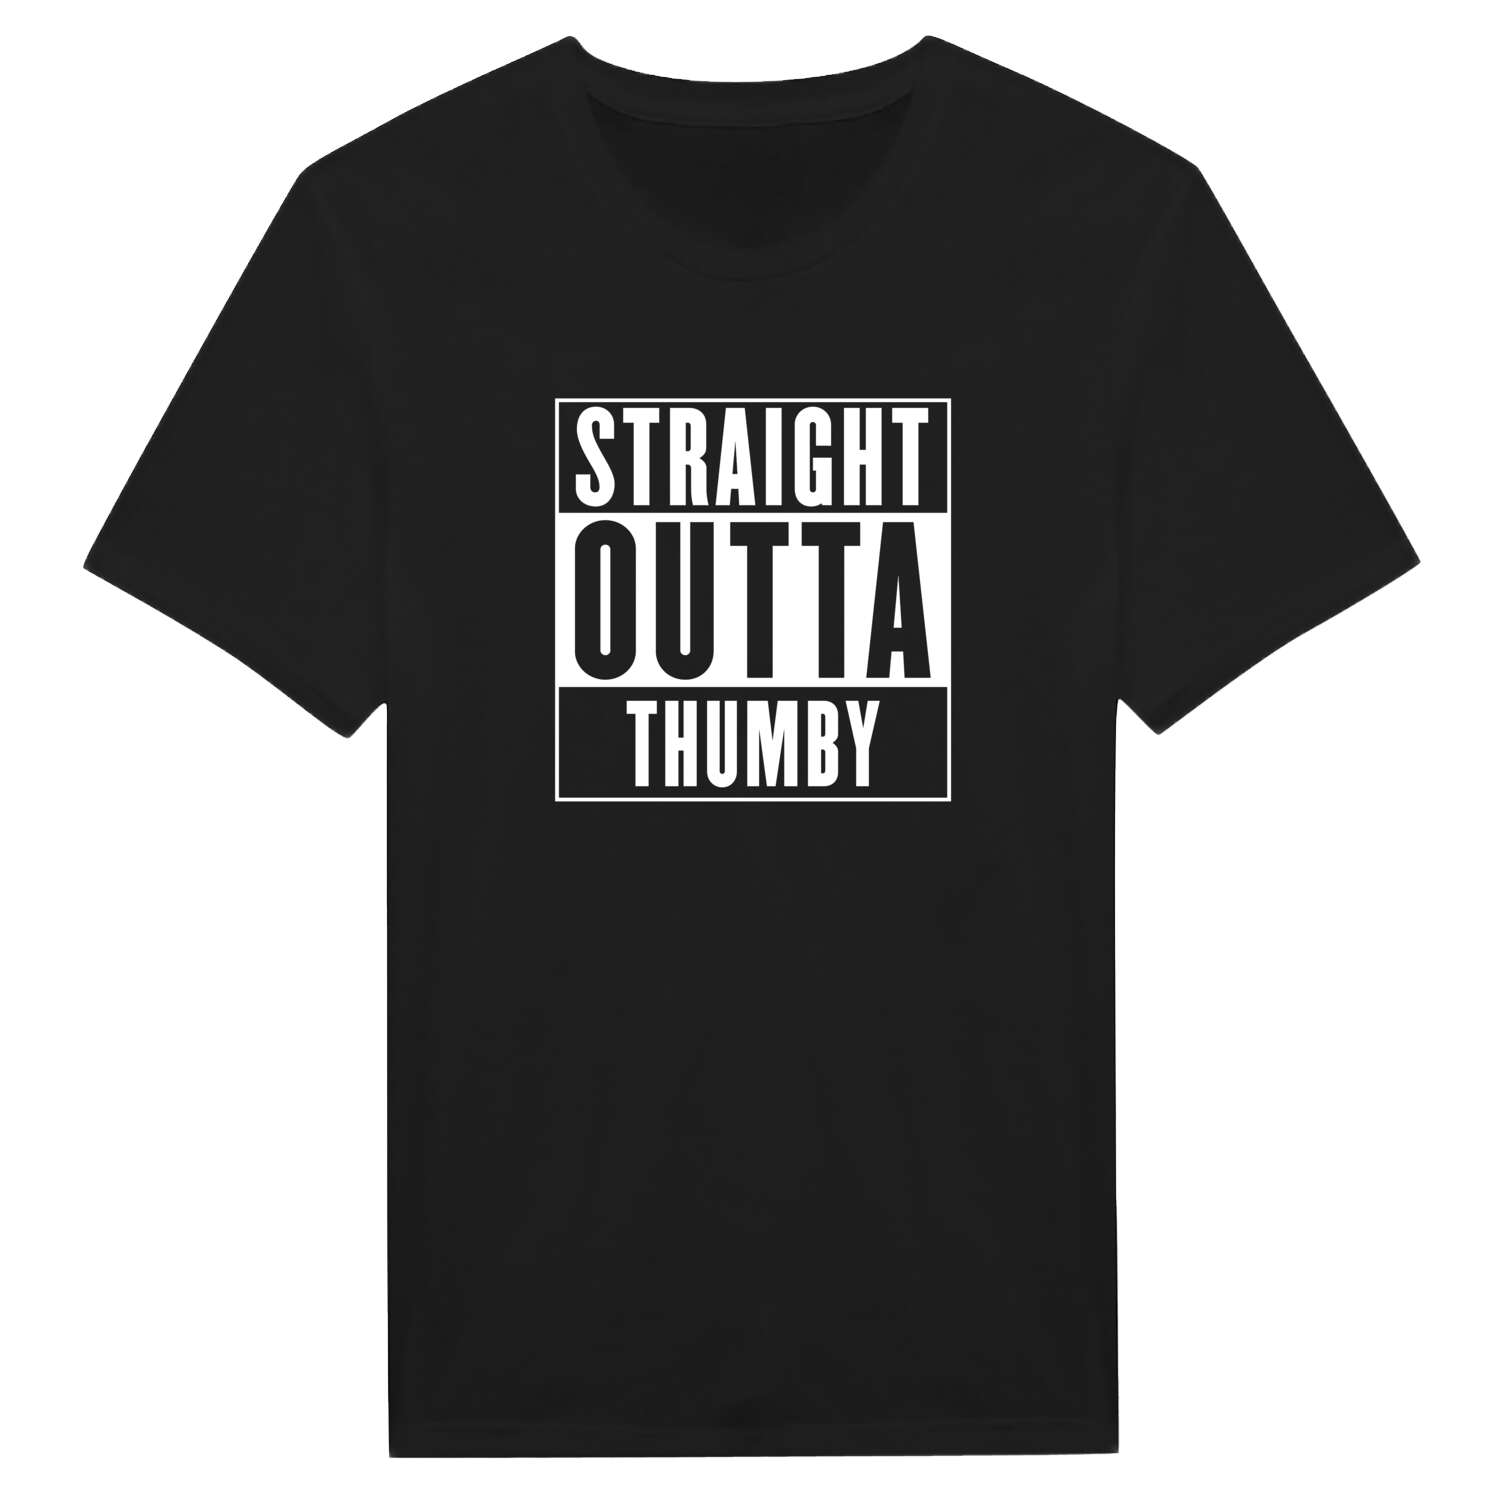 Thumby T-Shirt »Straight Outta«